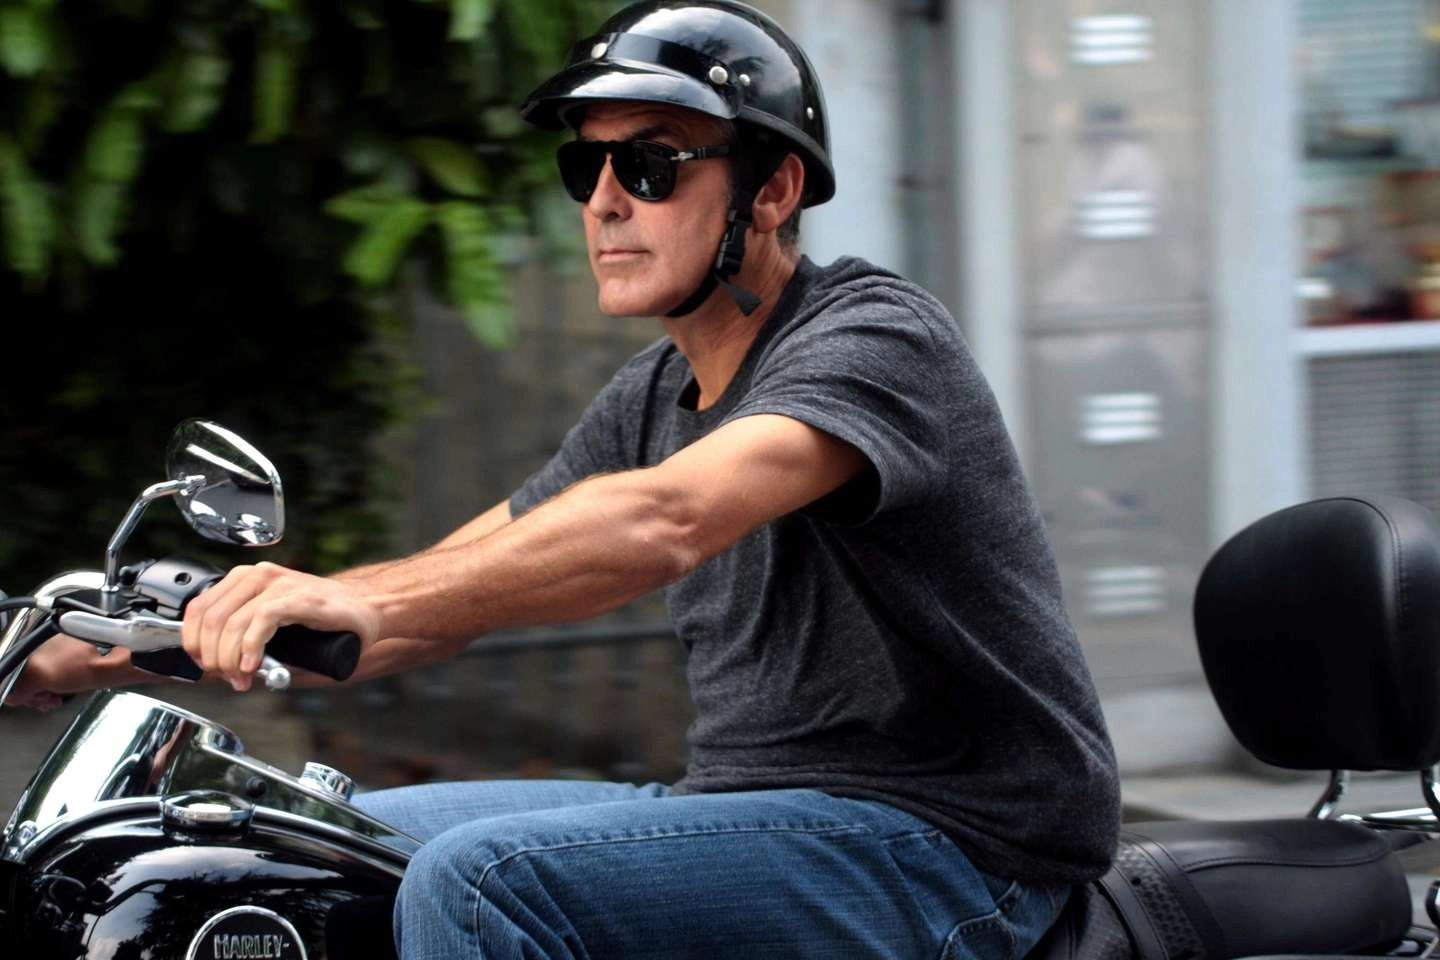 George Clooney on his motorcycle on the roads of Lario